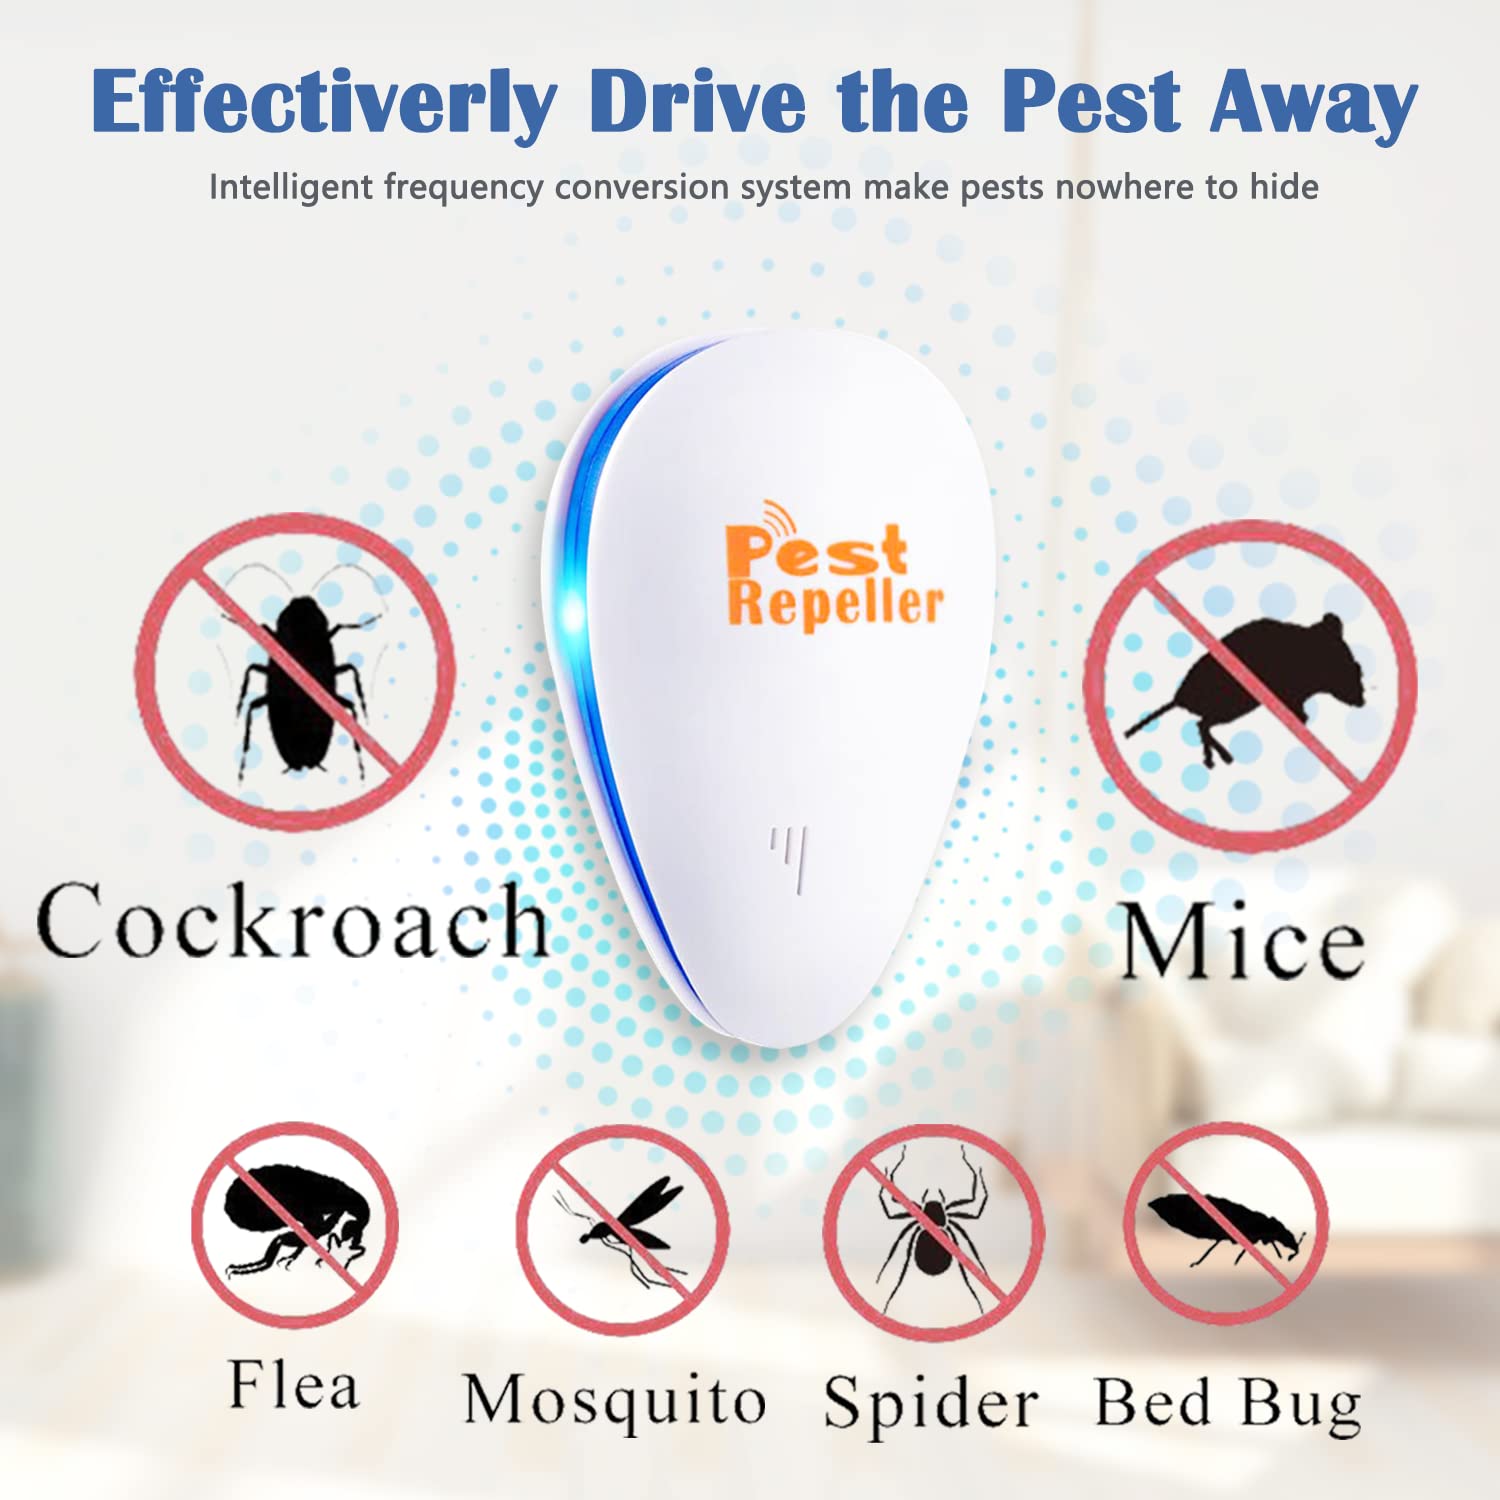 Ultrasonic Pest Repeller 6 Pack, Mice Repellent Plug-ins Pest Control for Insects Rodents, Electronic Pest Repellent, Rodent Repellent Indoor Ultrasonic for Home, Kitchen, Warehouse, Hotel, Office